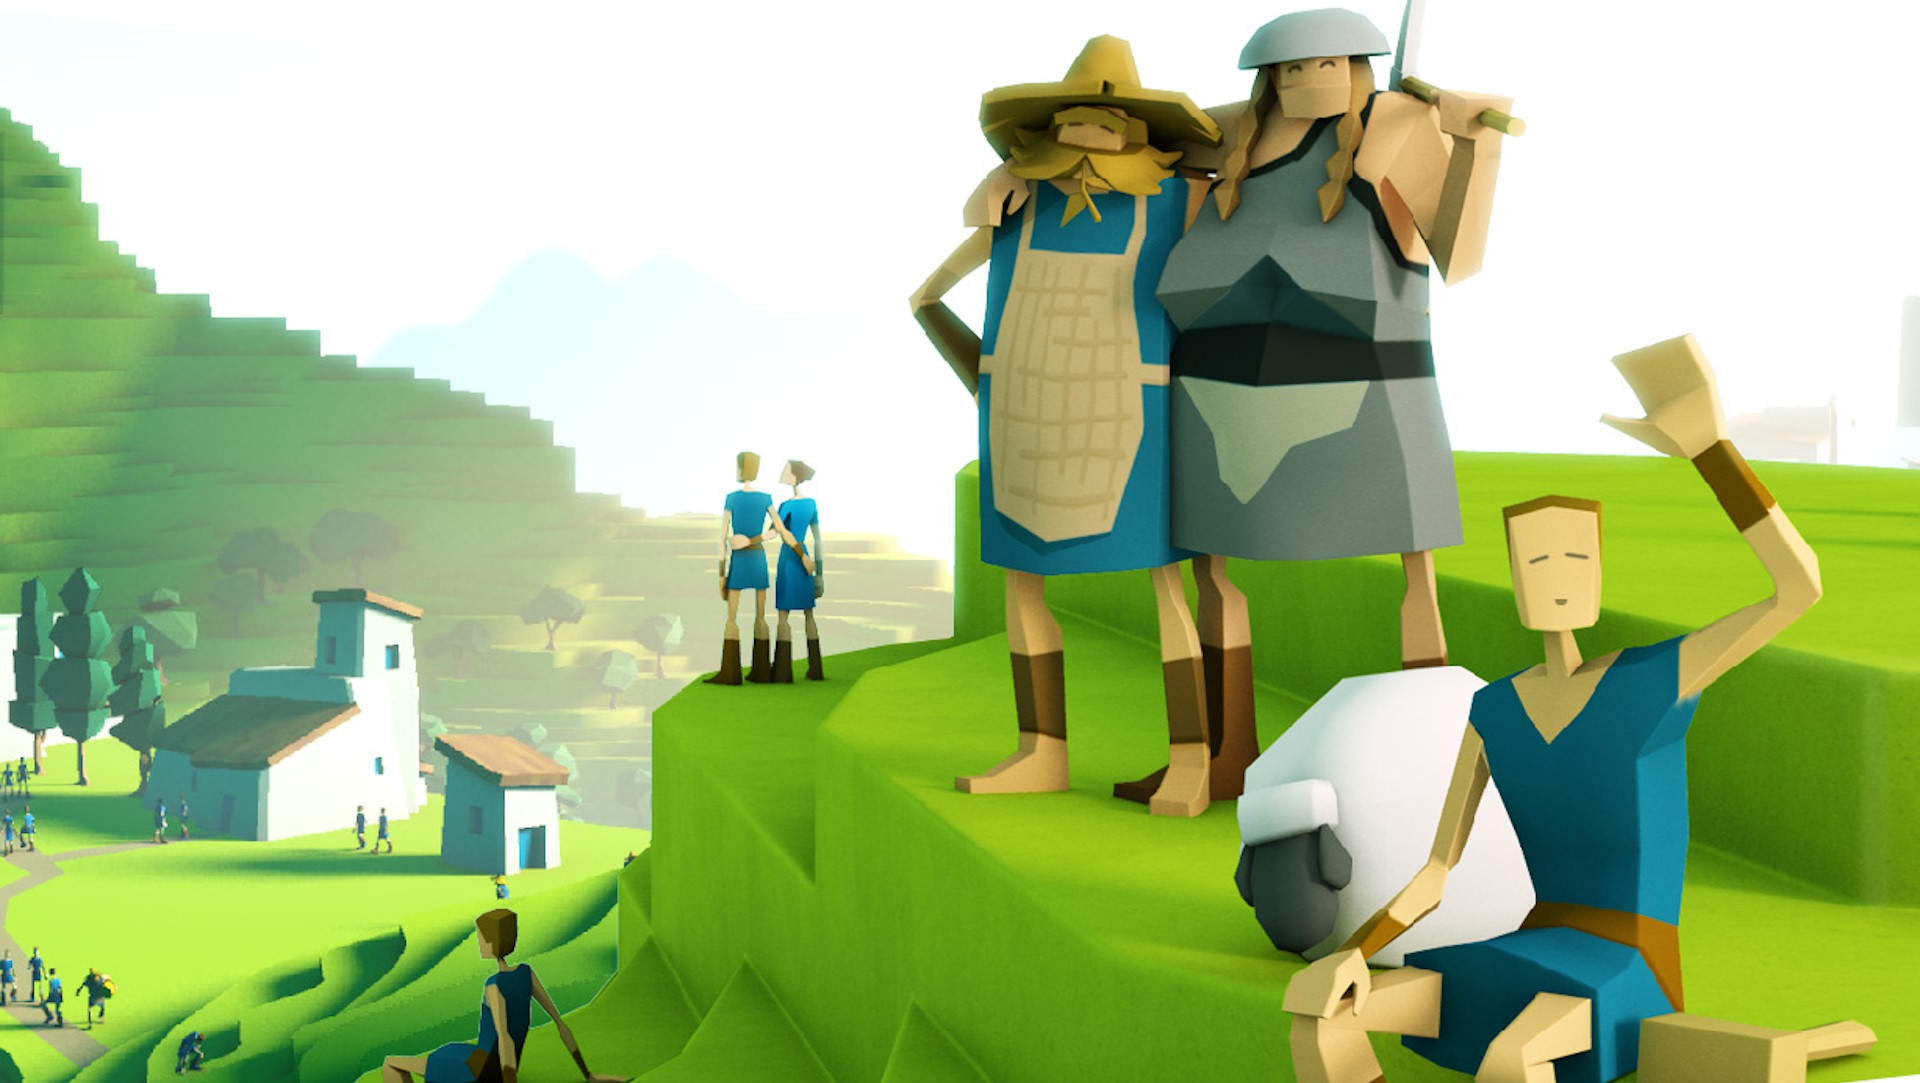  Godus is deadus: Peter Molyneux's controversial Godus games are finally being taken off Steam 